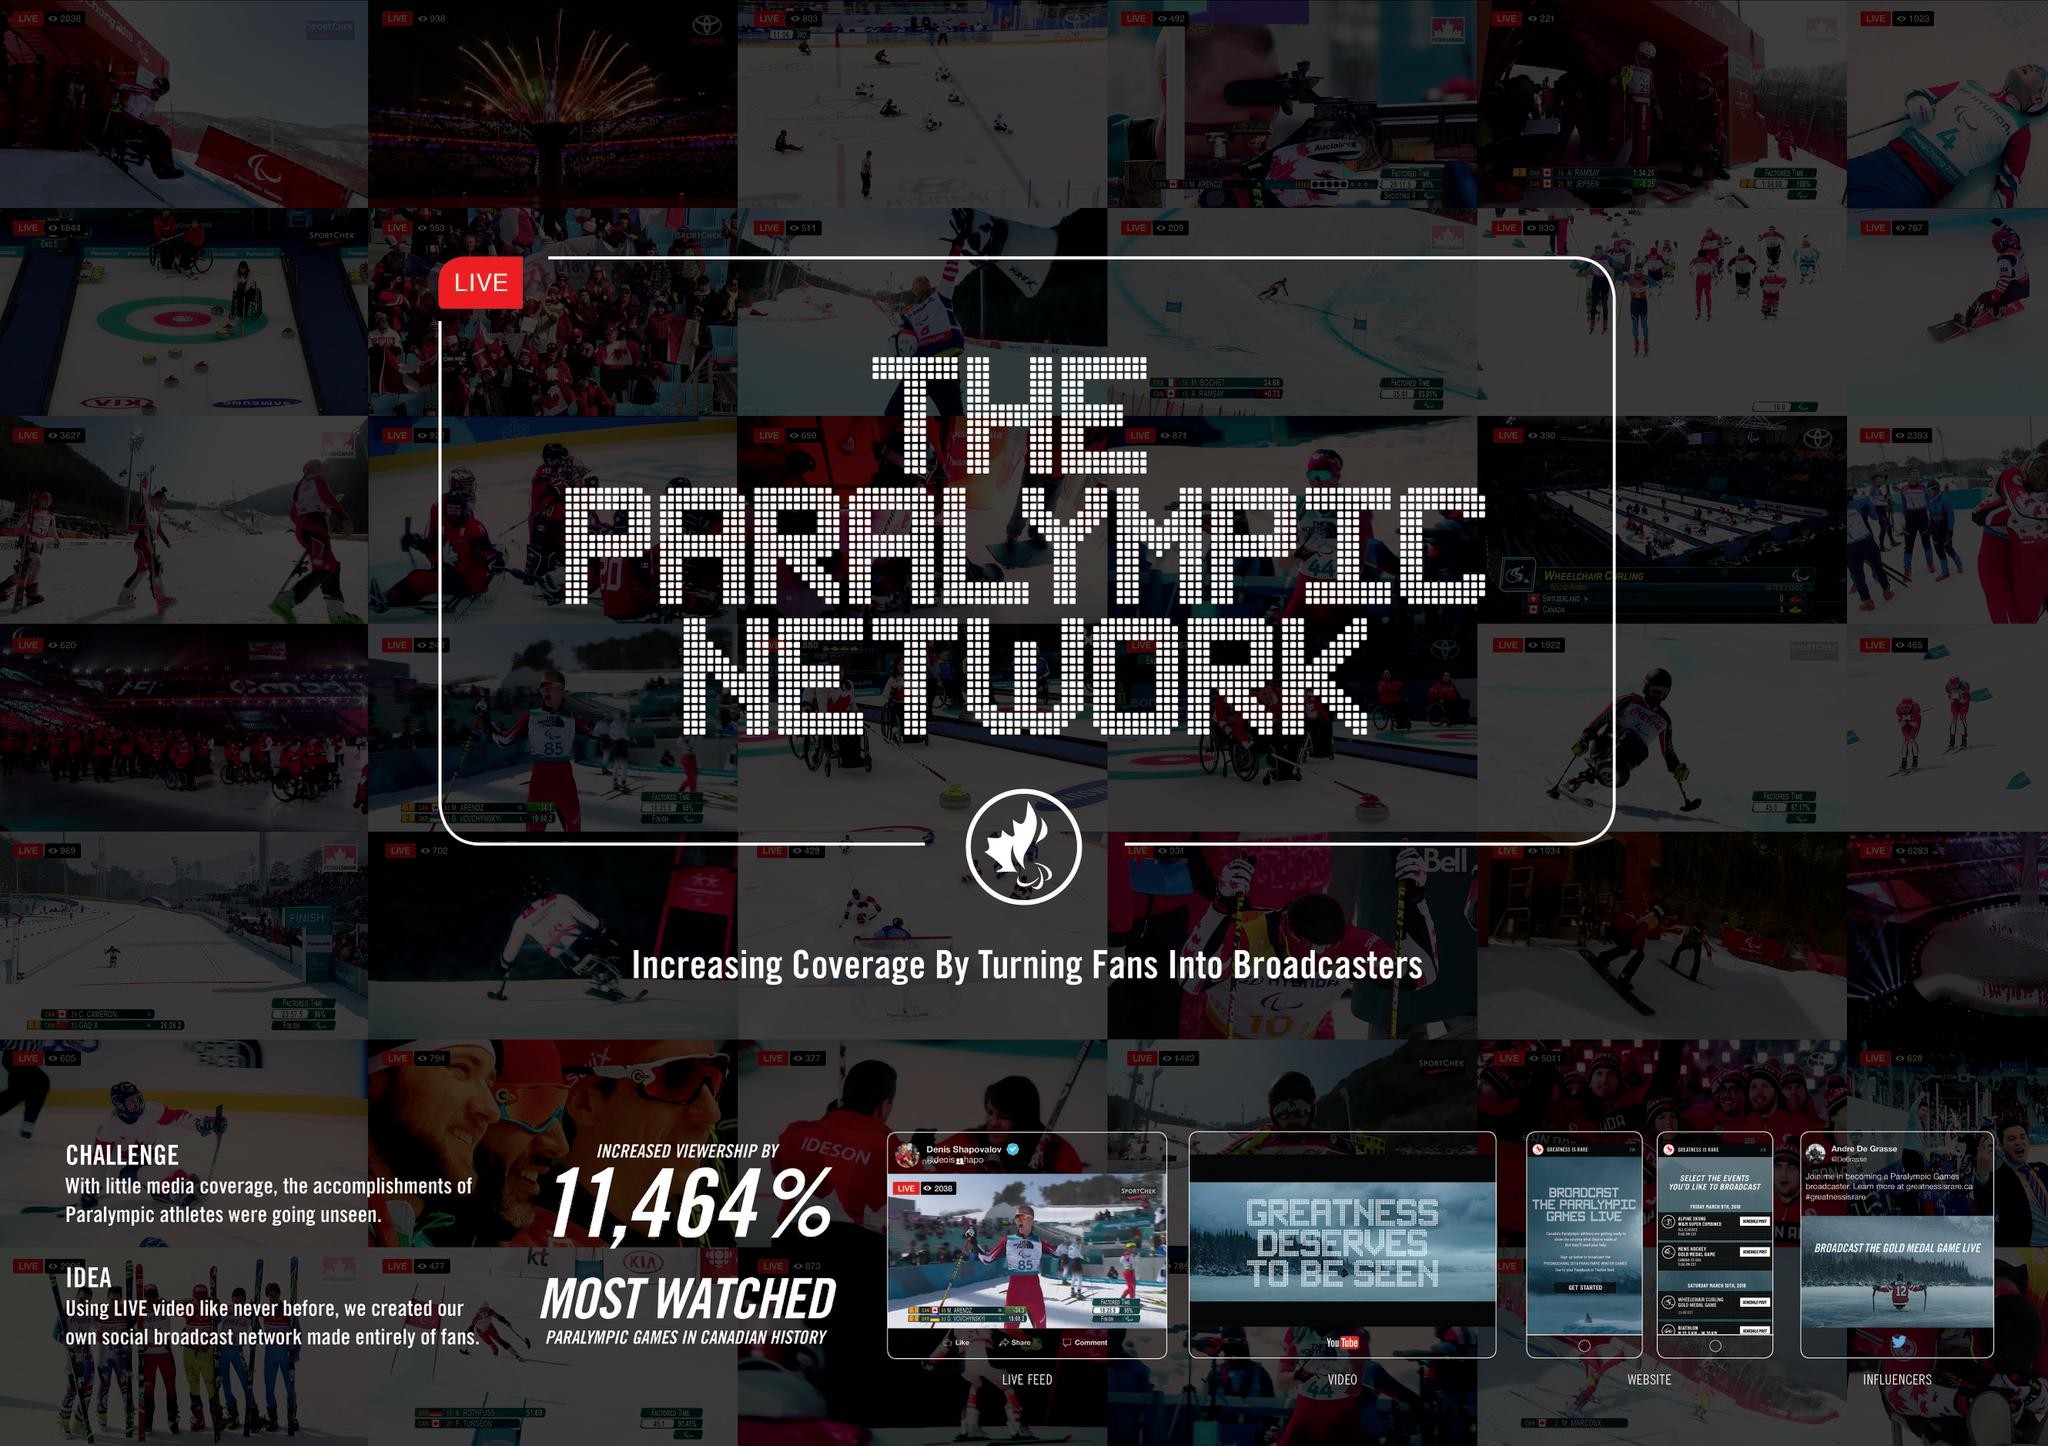 THE PARALYMPIC NETWORK 